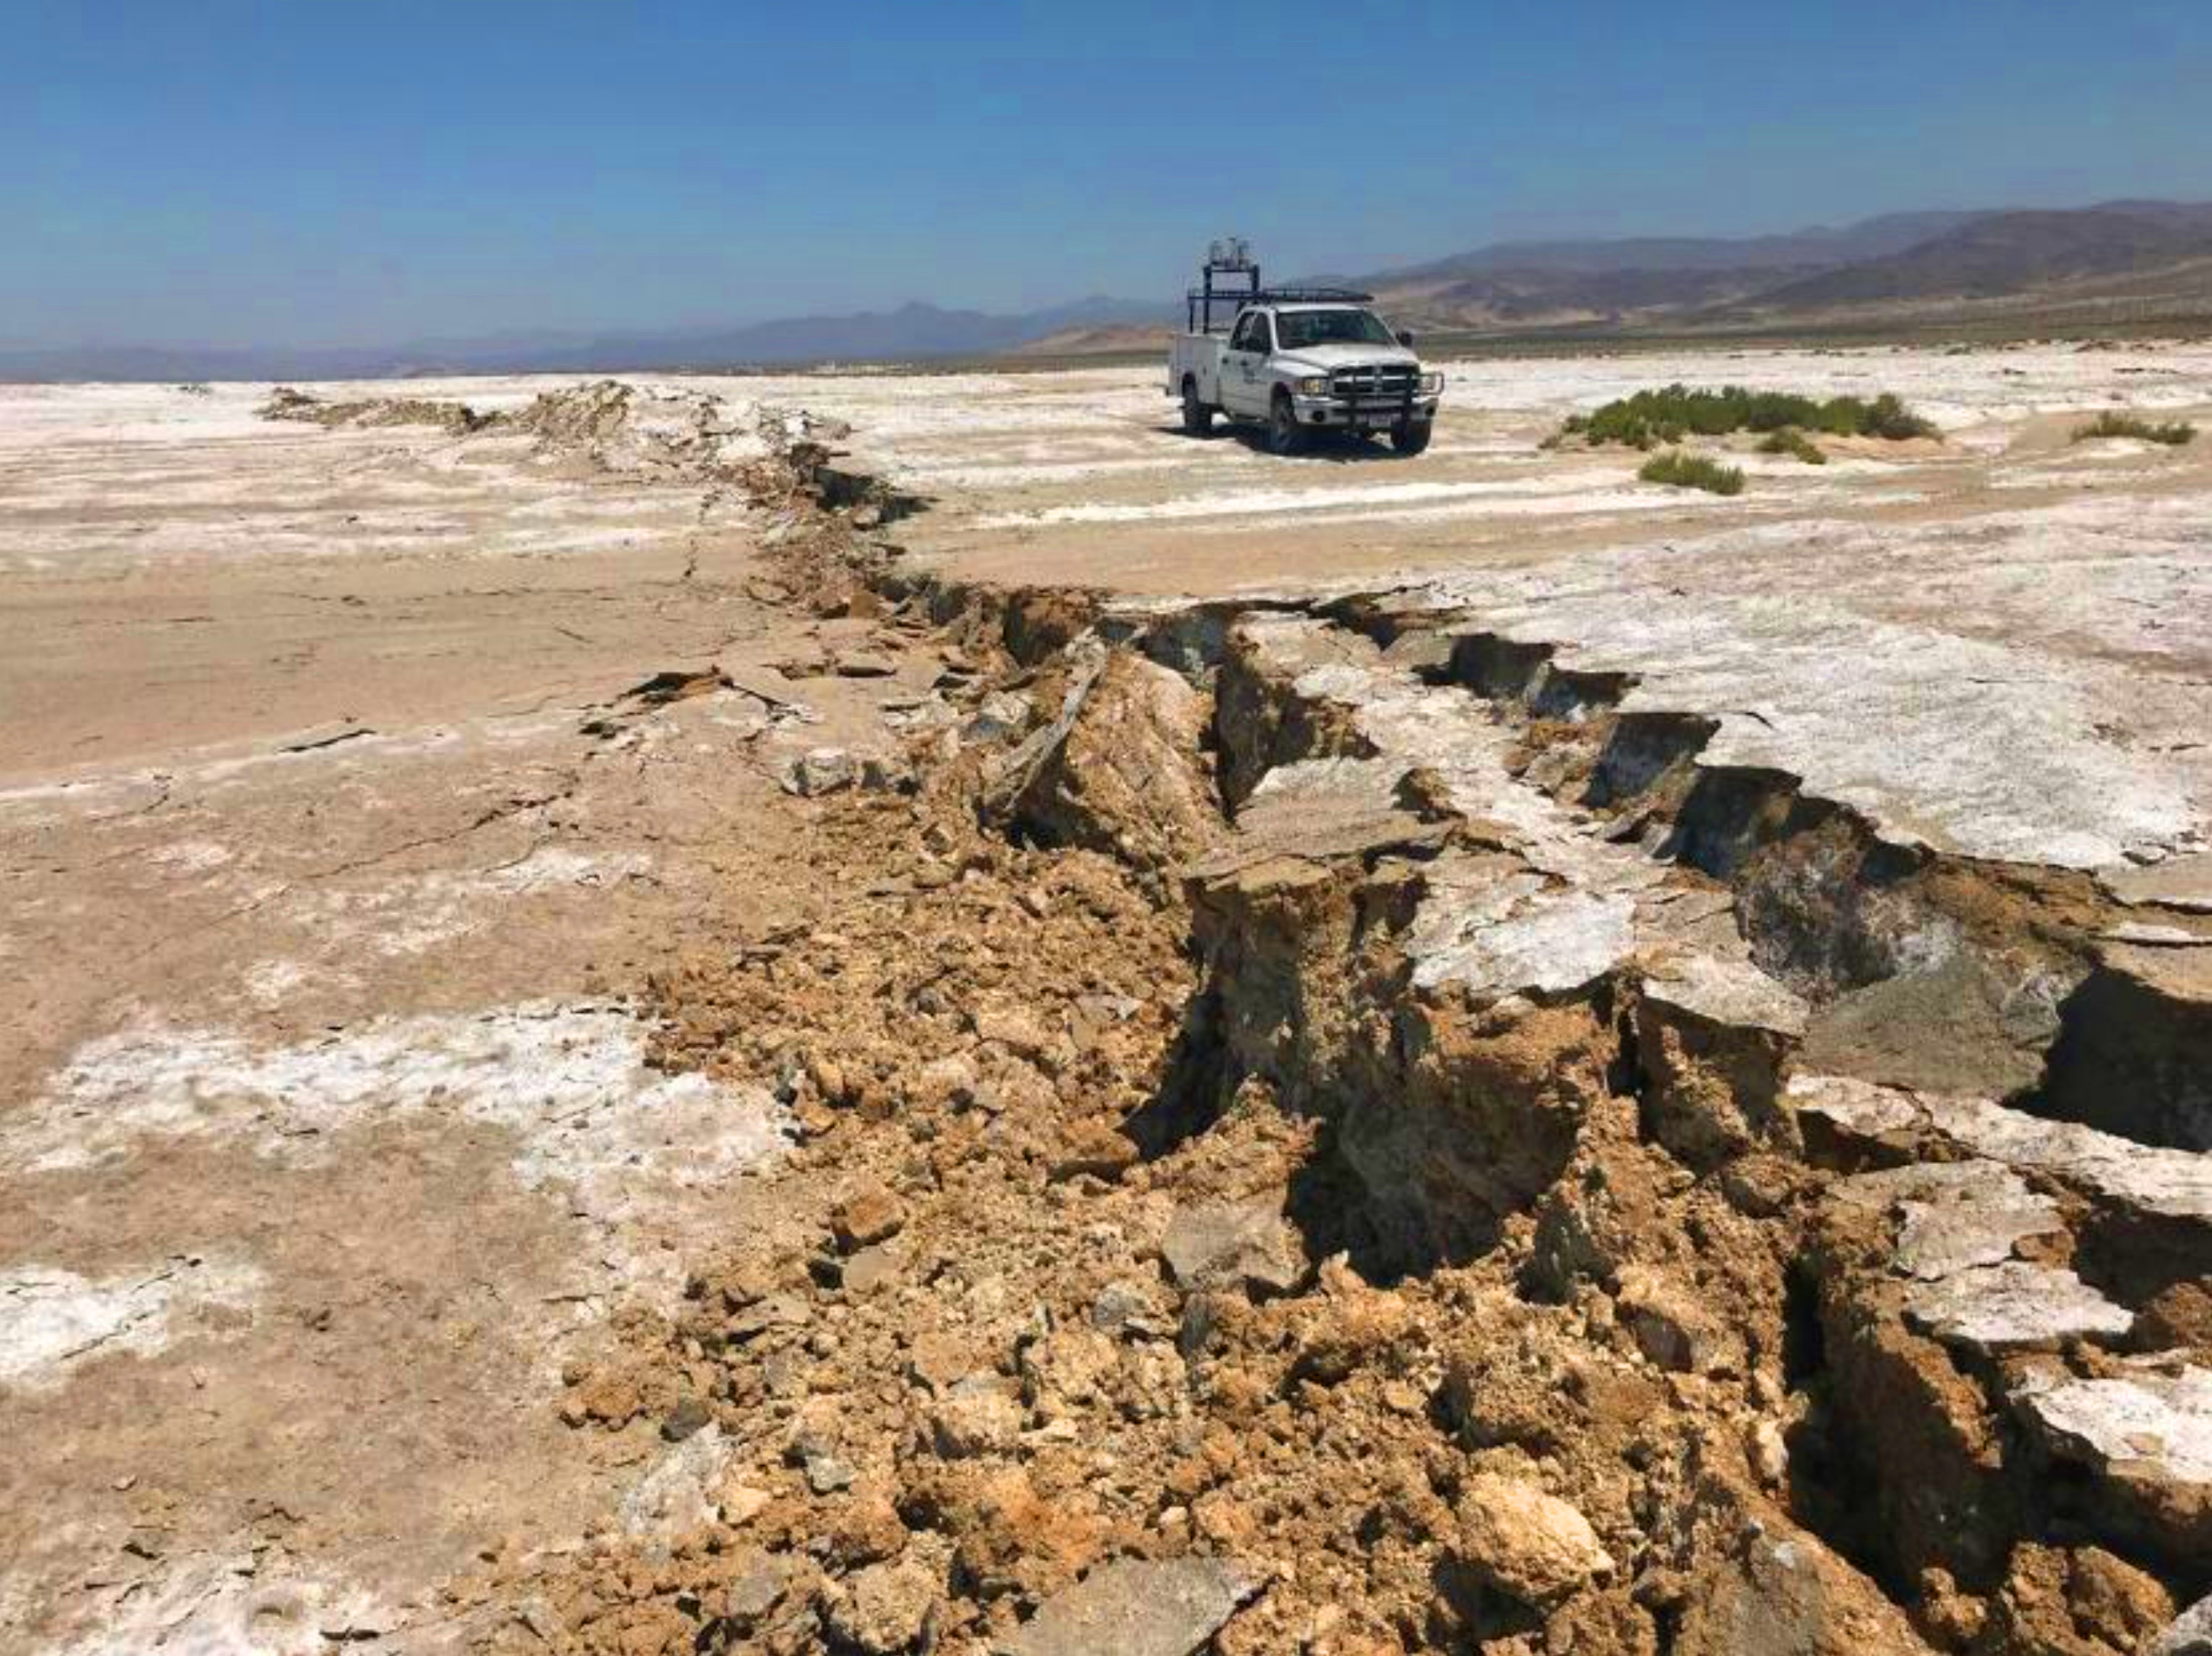 Photo of rupture of Earth's surface and a pickup truck.